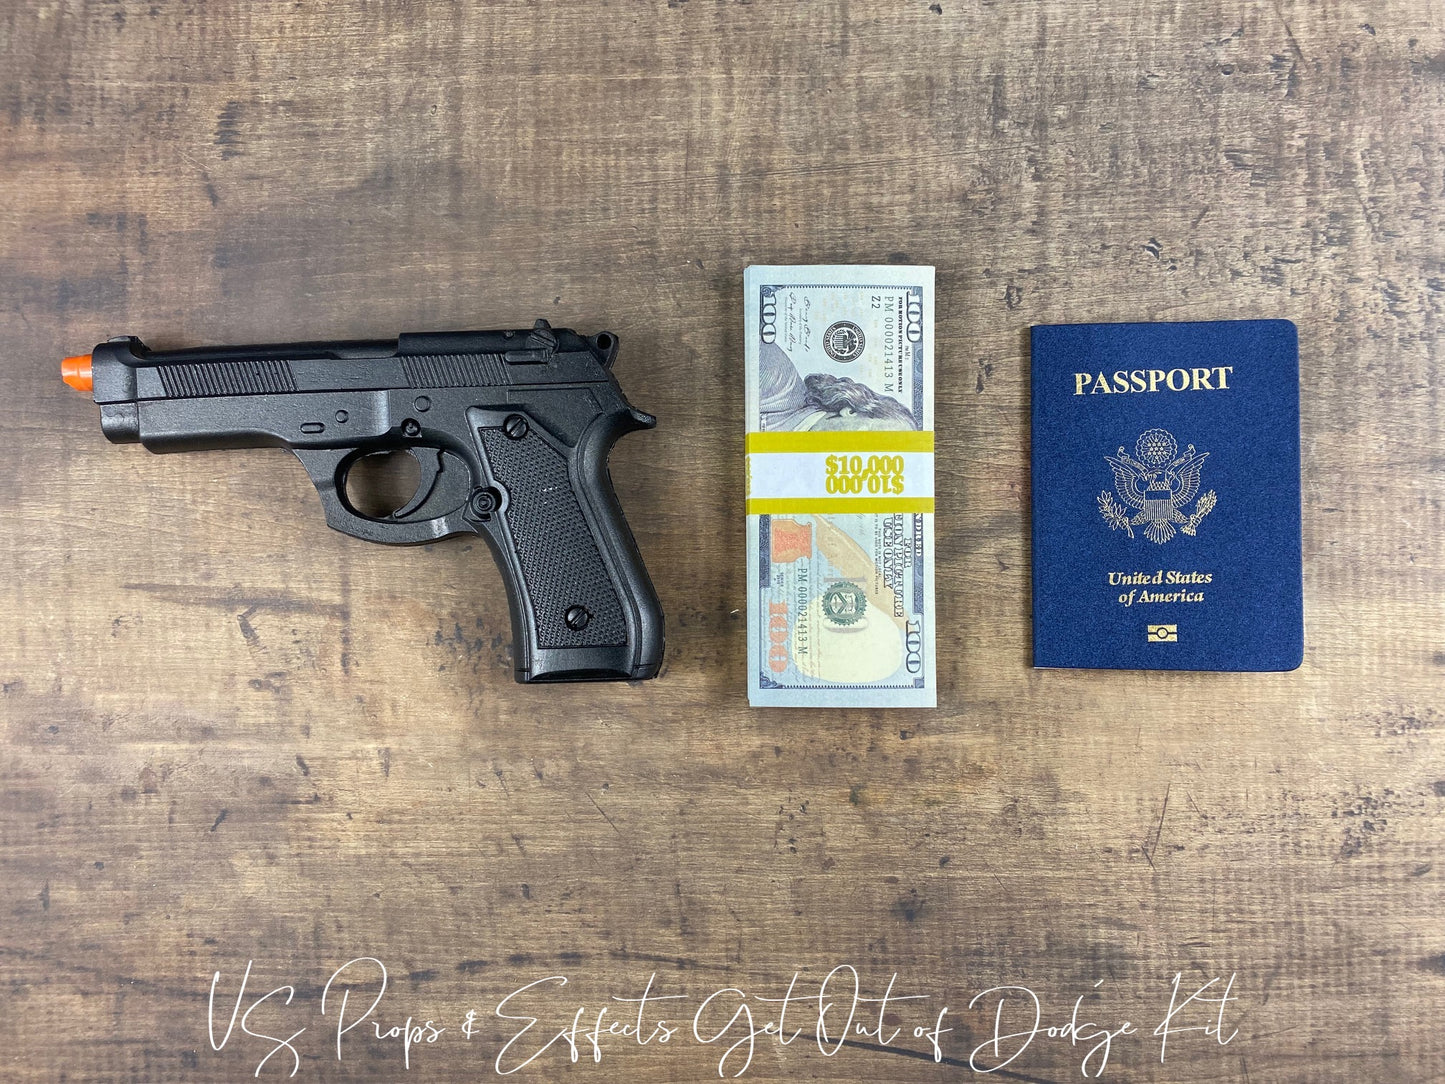 "Get Out of Dodge" Kit- Includes Solid Foam Rubber Gun, Stack of Prop Movie Money, and a US Props & Effects Prop Passport